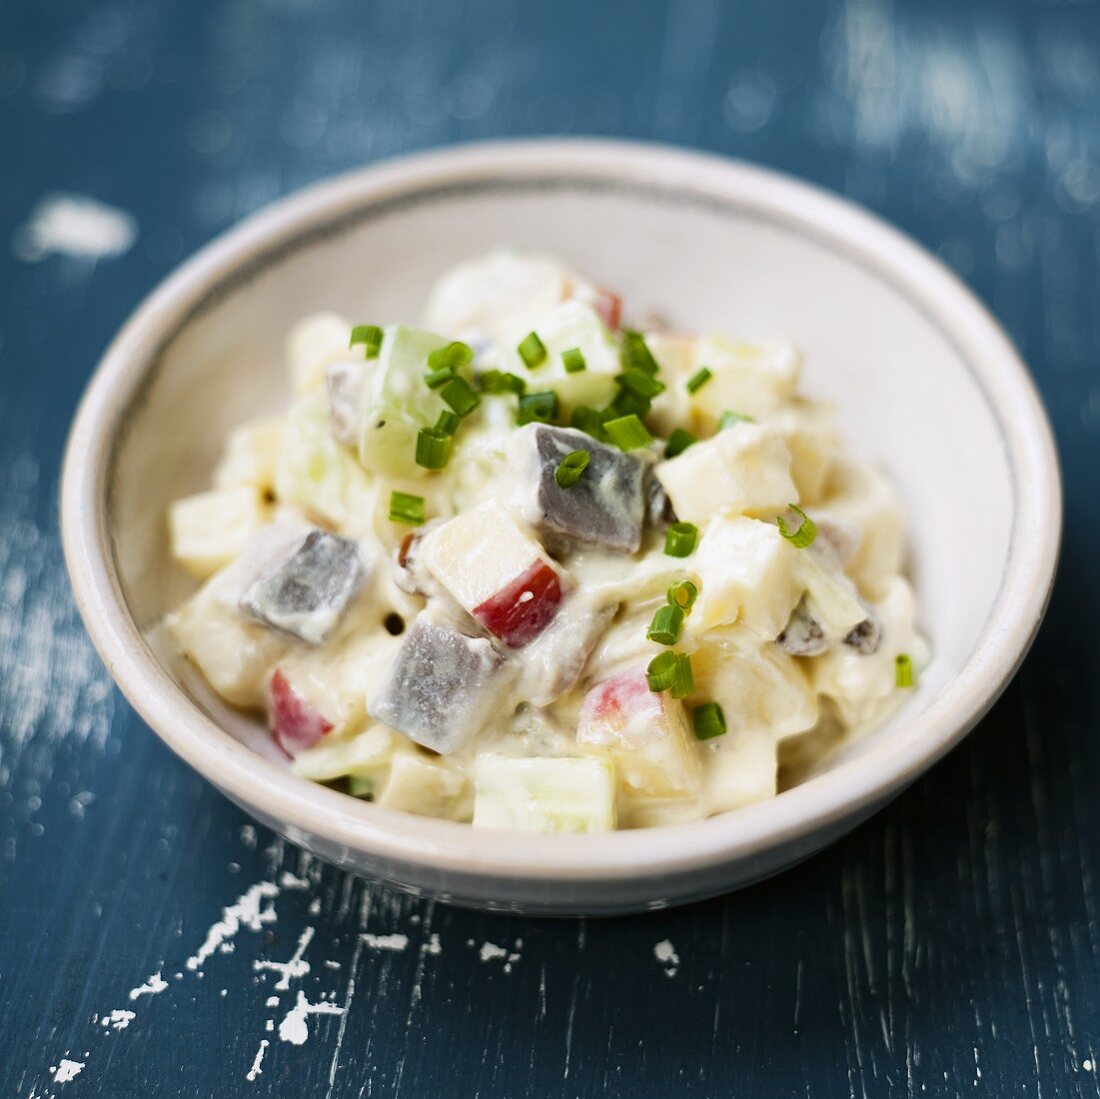 Potato, herring and apple salad with chives